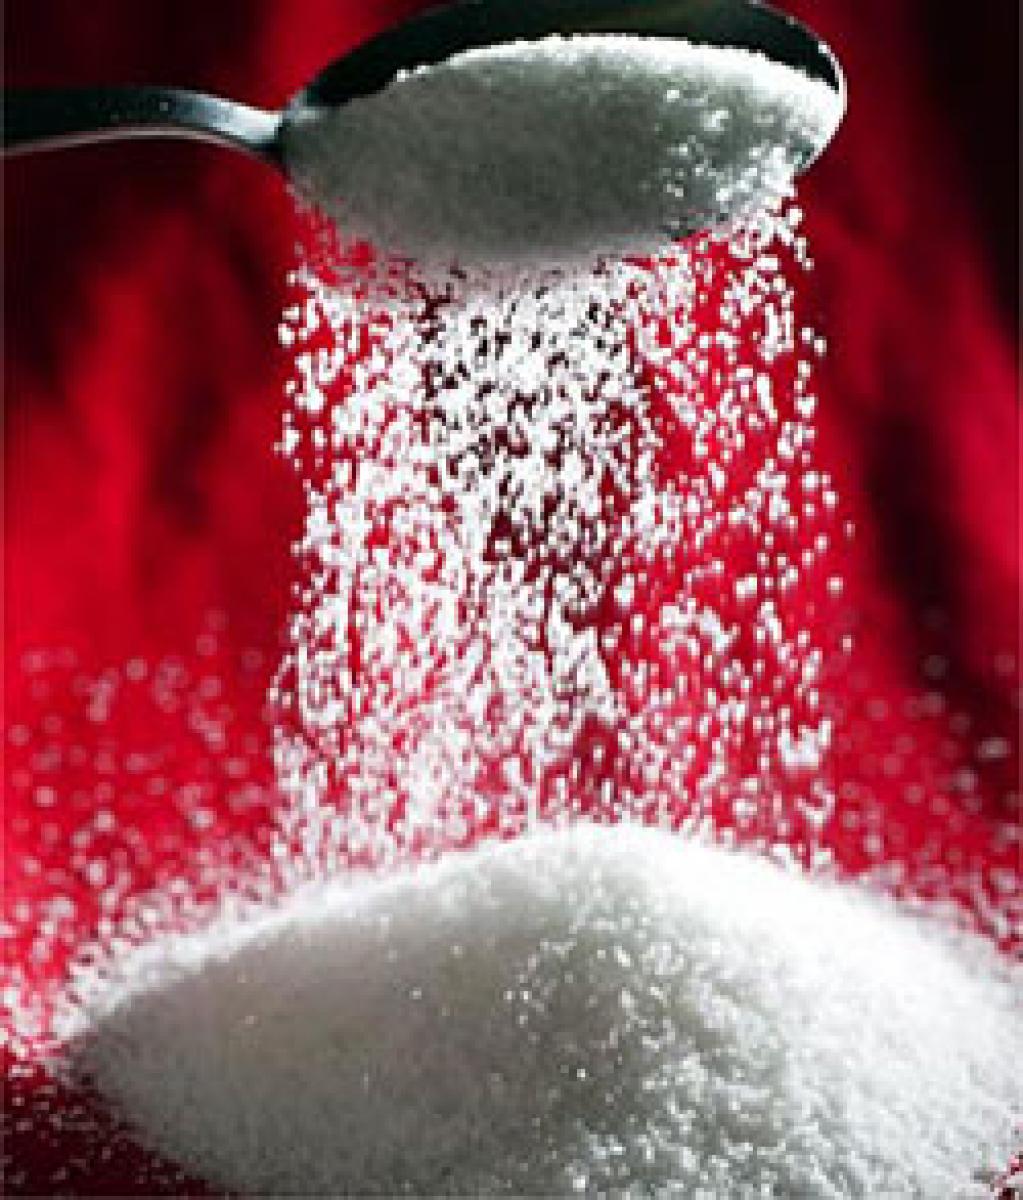 Sugar output may fall by 4.6% this year: ICRA